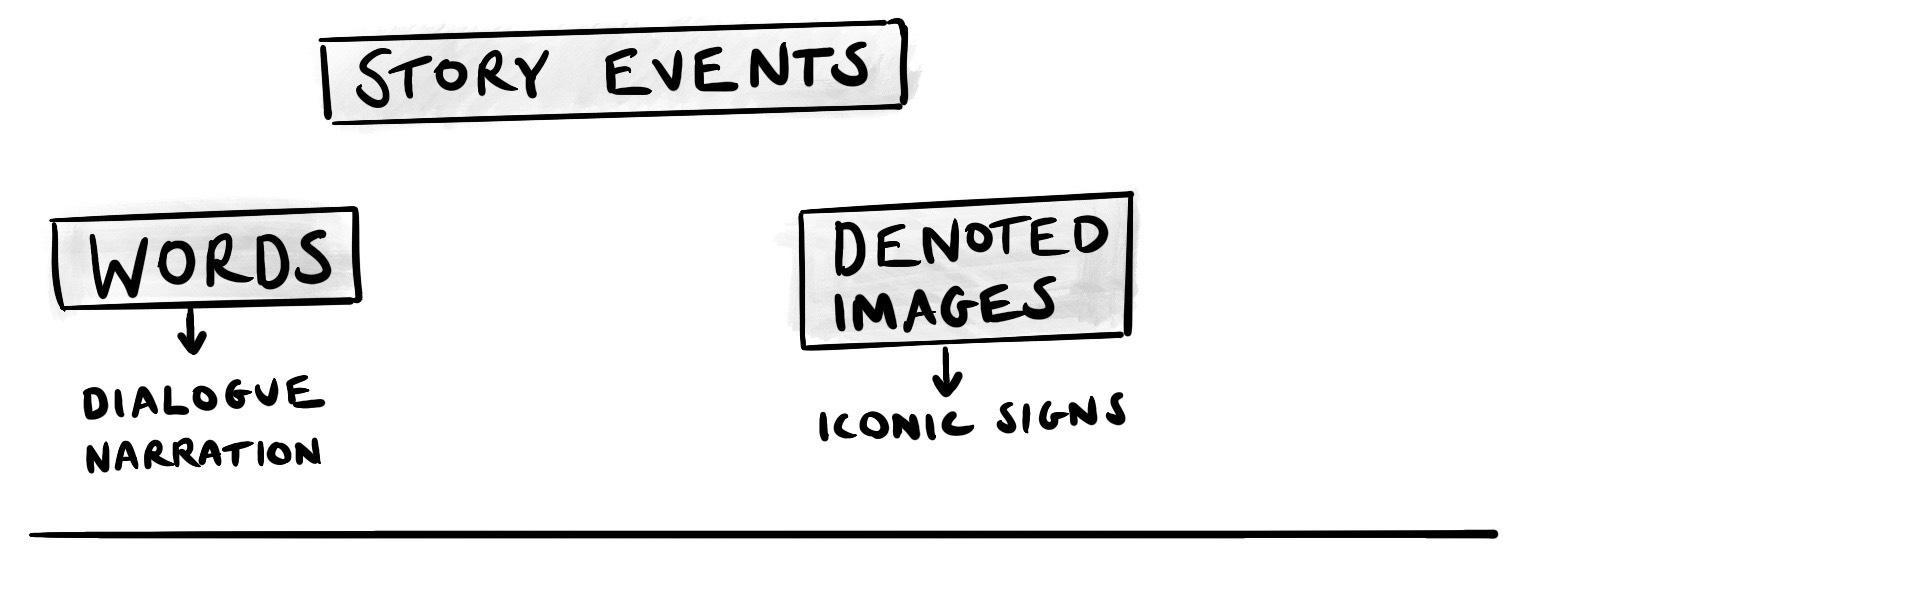 A simple line. Above it, the words &ldquo;Story events&rdquo;, &ldquo;Words: Dialogue, Narration&rdquo; and &ldquo;Denoted Images: Iconic signs&rdquo;